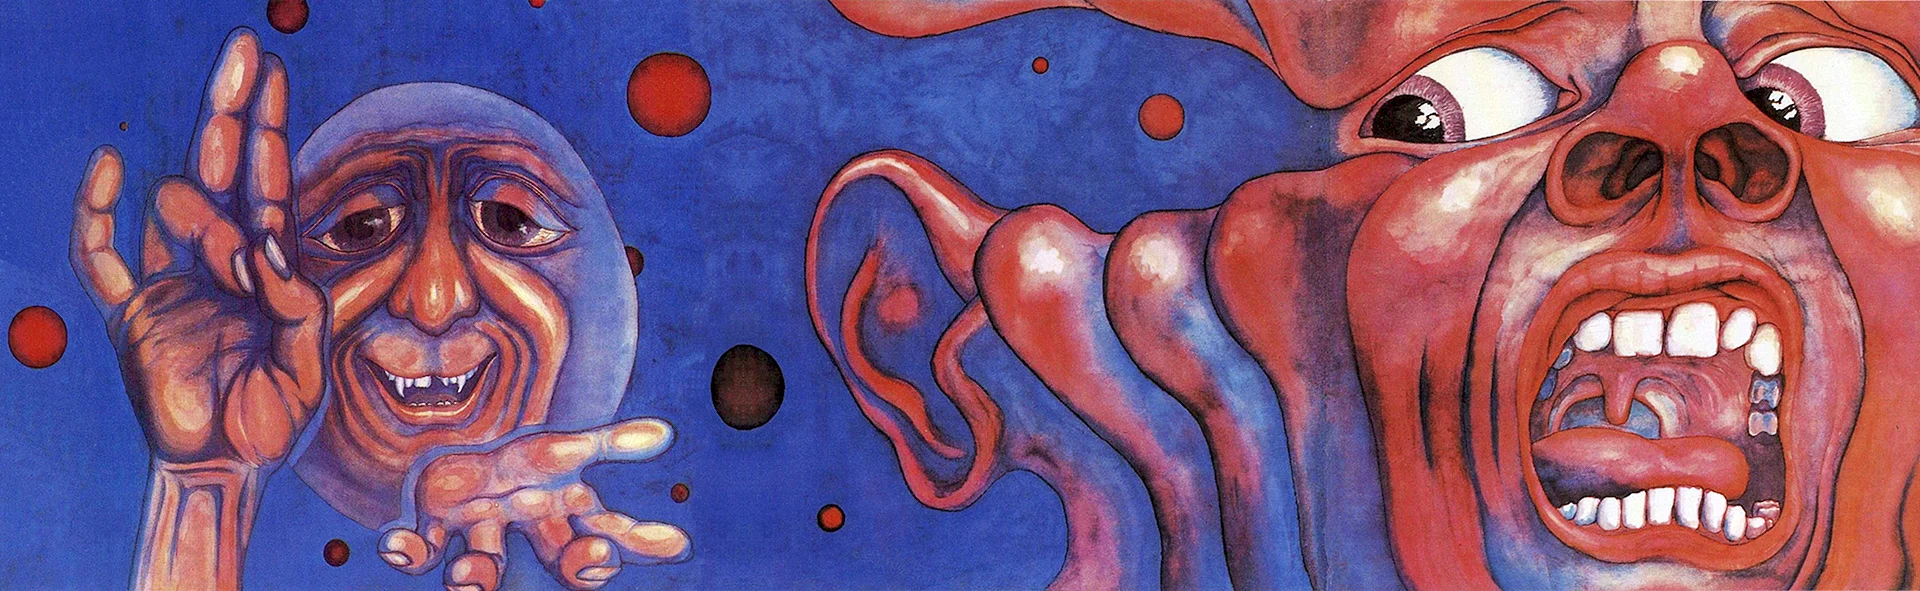 In The Court Of The Crimson King Album Cover Wallpaper